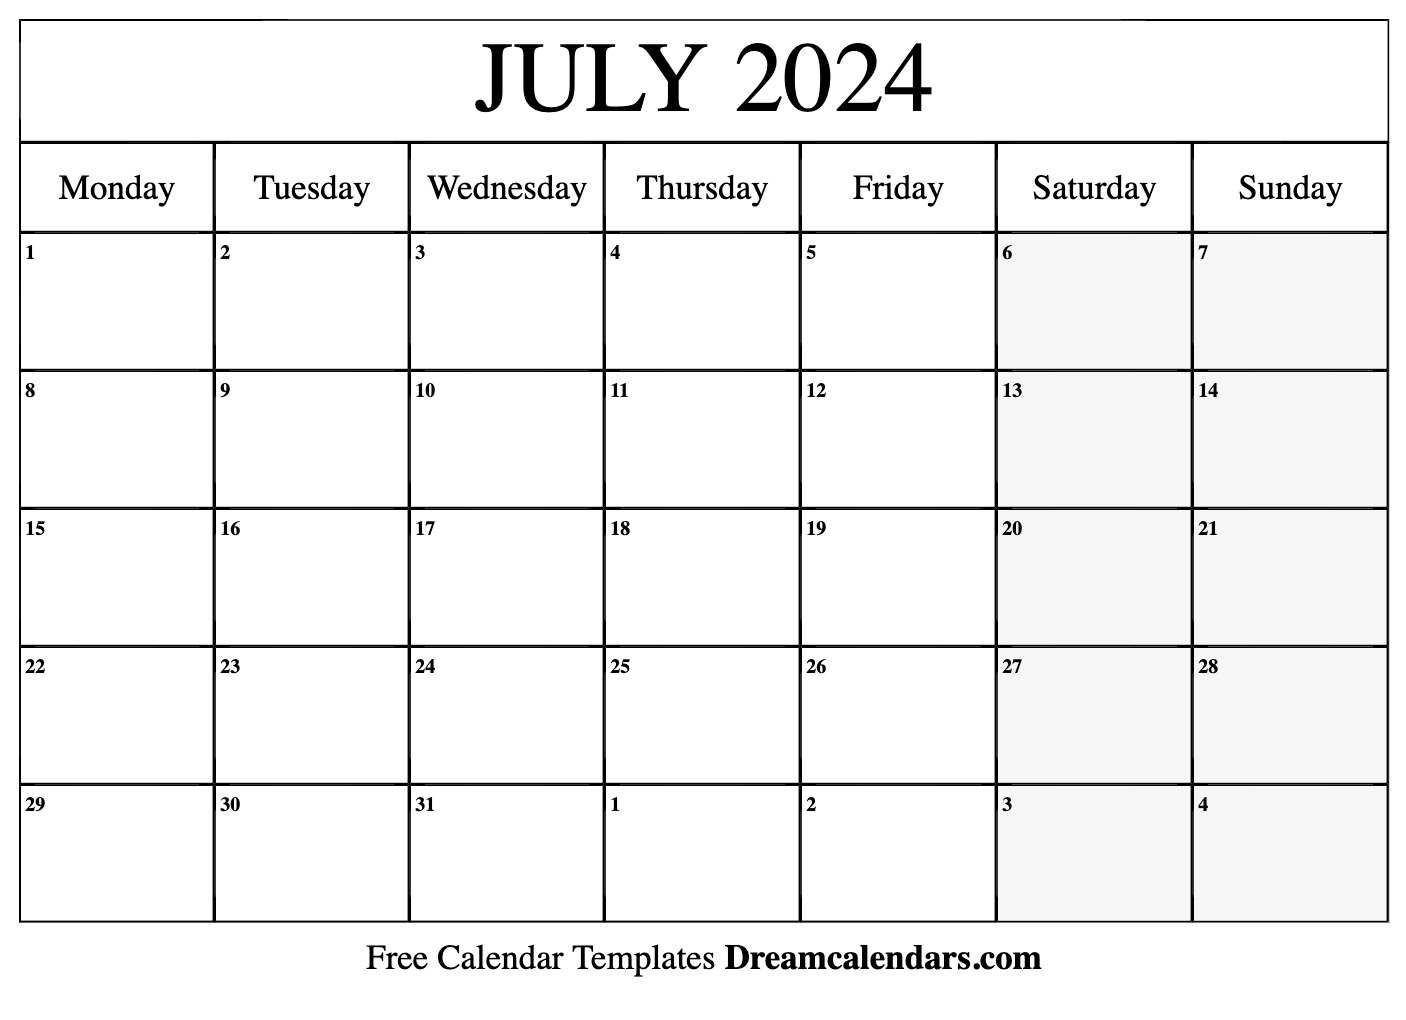 July 2024 Calendar | Free Blank Printable With Holidays for July 2024 Weekly Calendar Printable